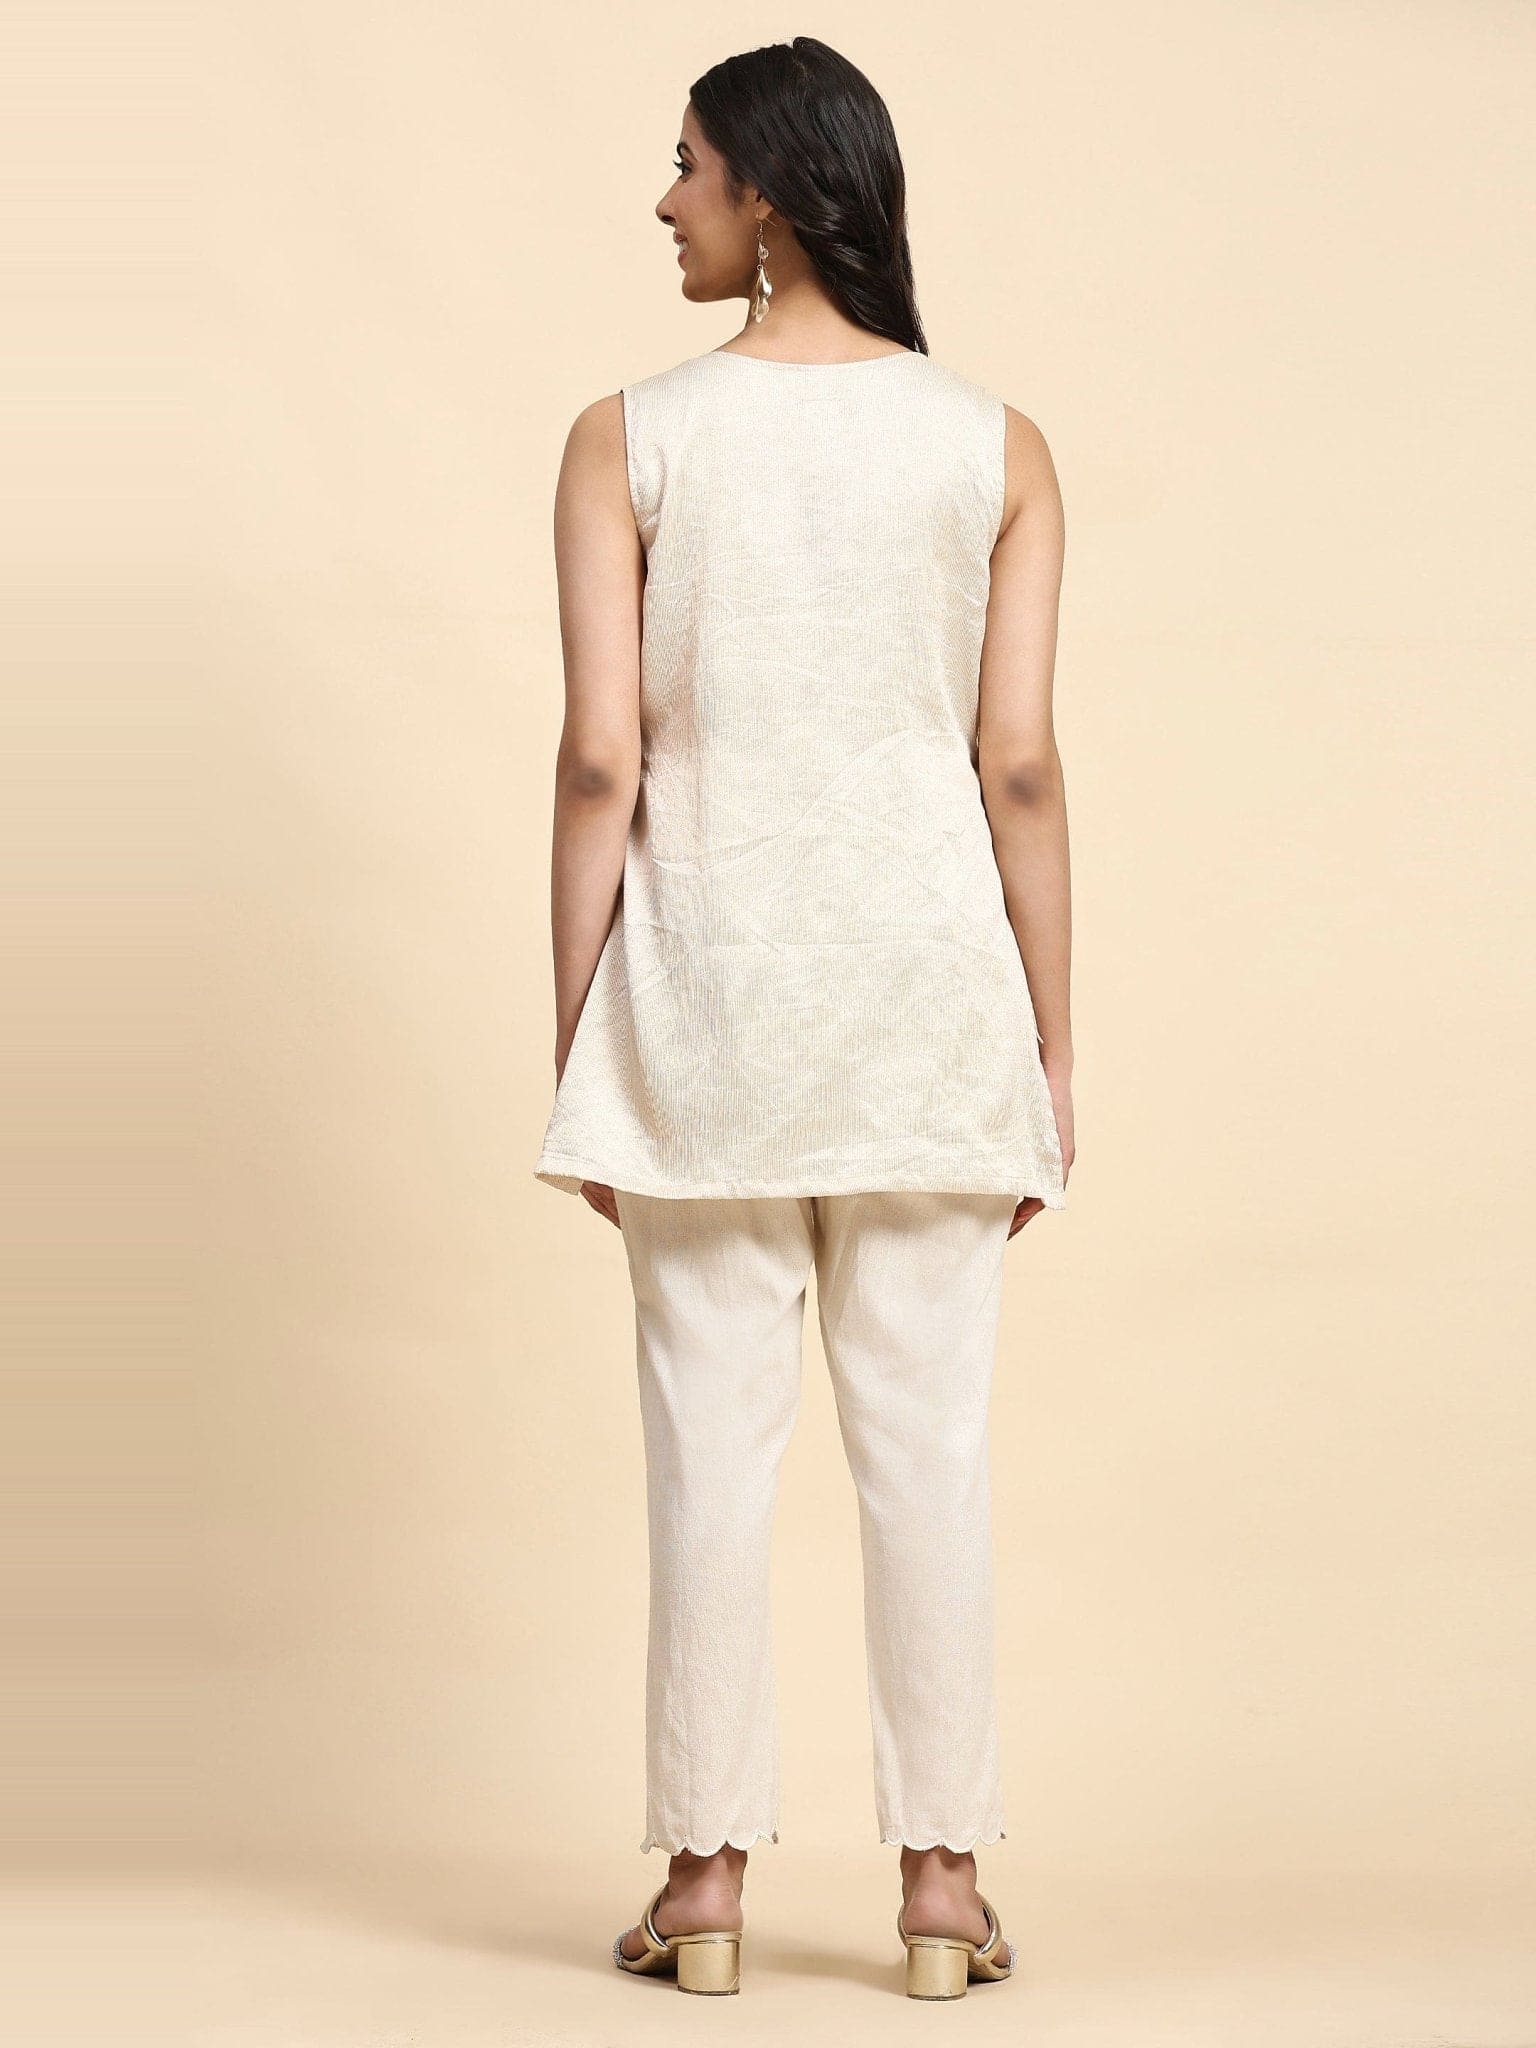 Off-White Patch Work Co-Ord Set - Charkha TalesOff-White Patch Work Co-Ord Set